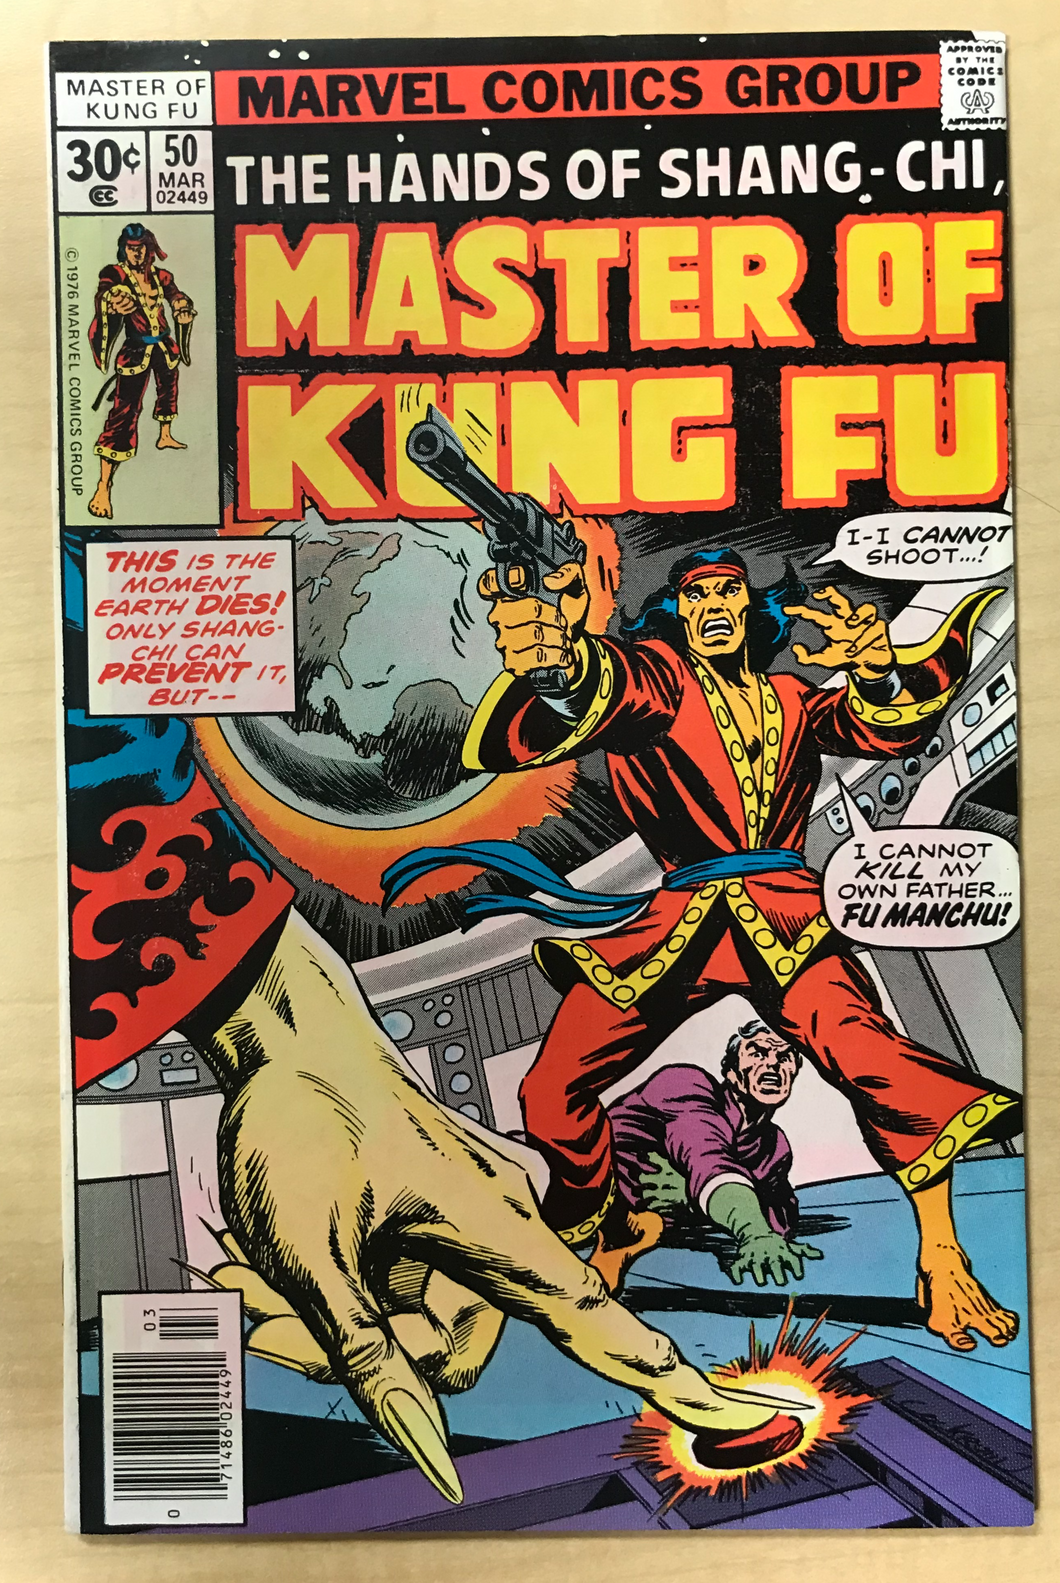 Master of Kung Fu (vol. 1) #50 Dave Cockrum Cover Marvel March 1977 VF Shang-Chi Fu Manchu